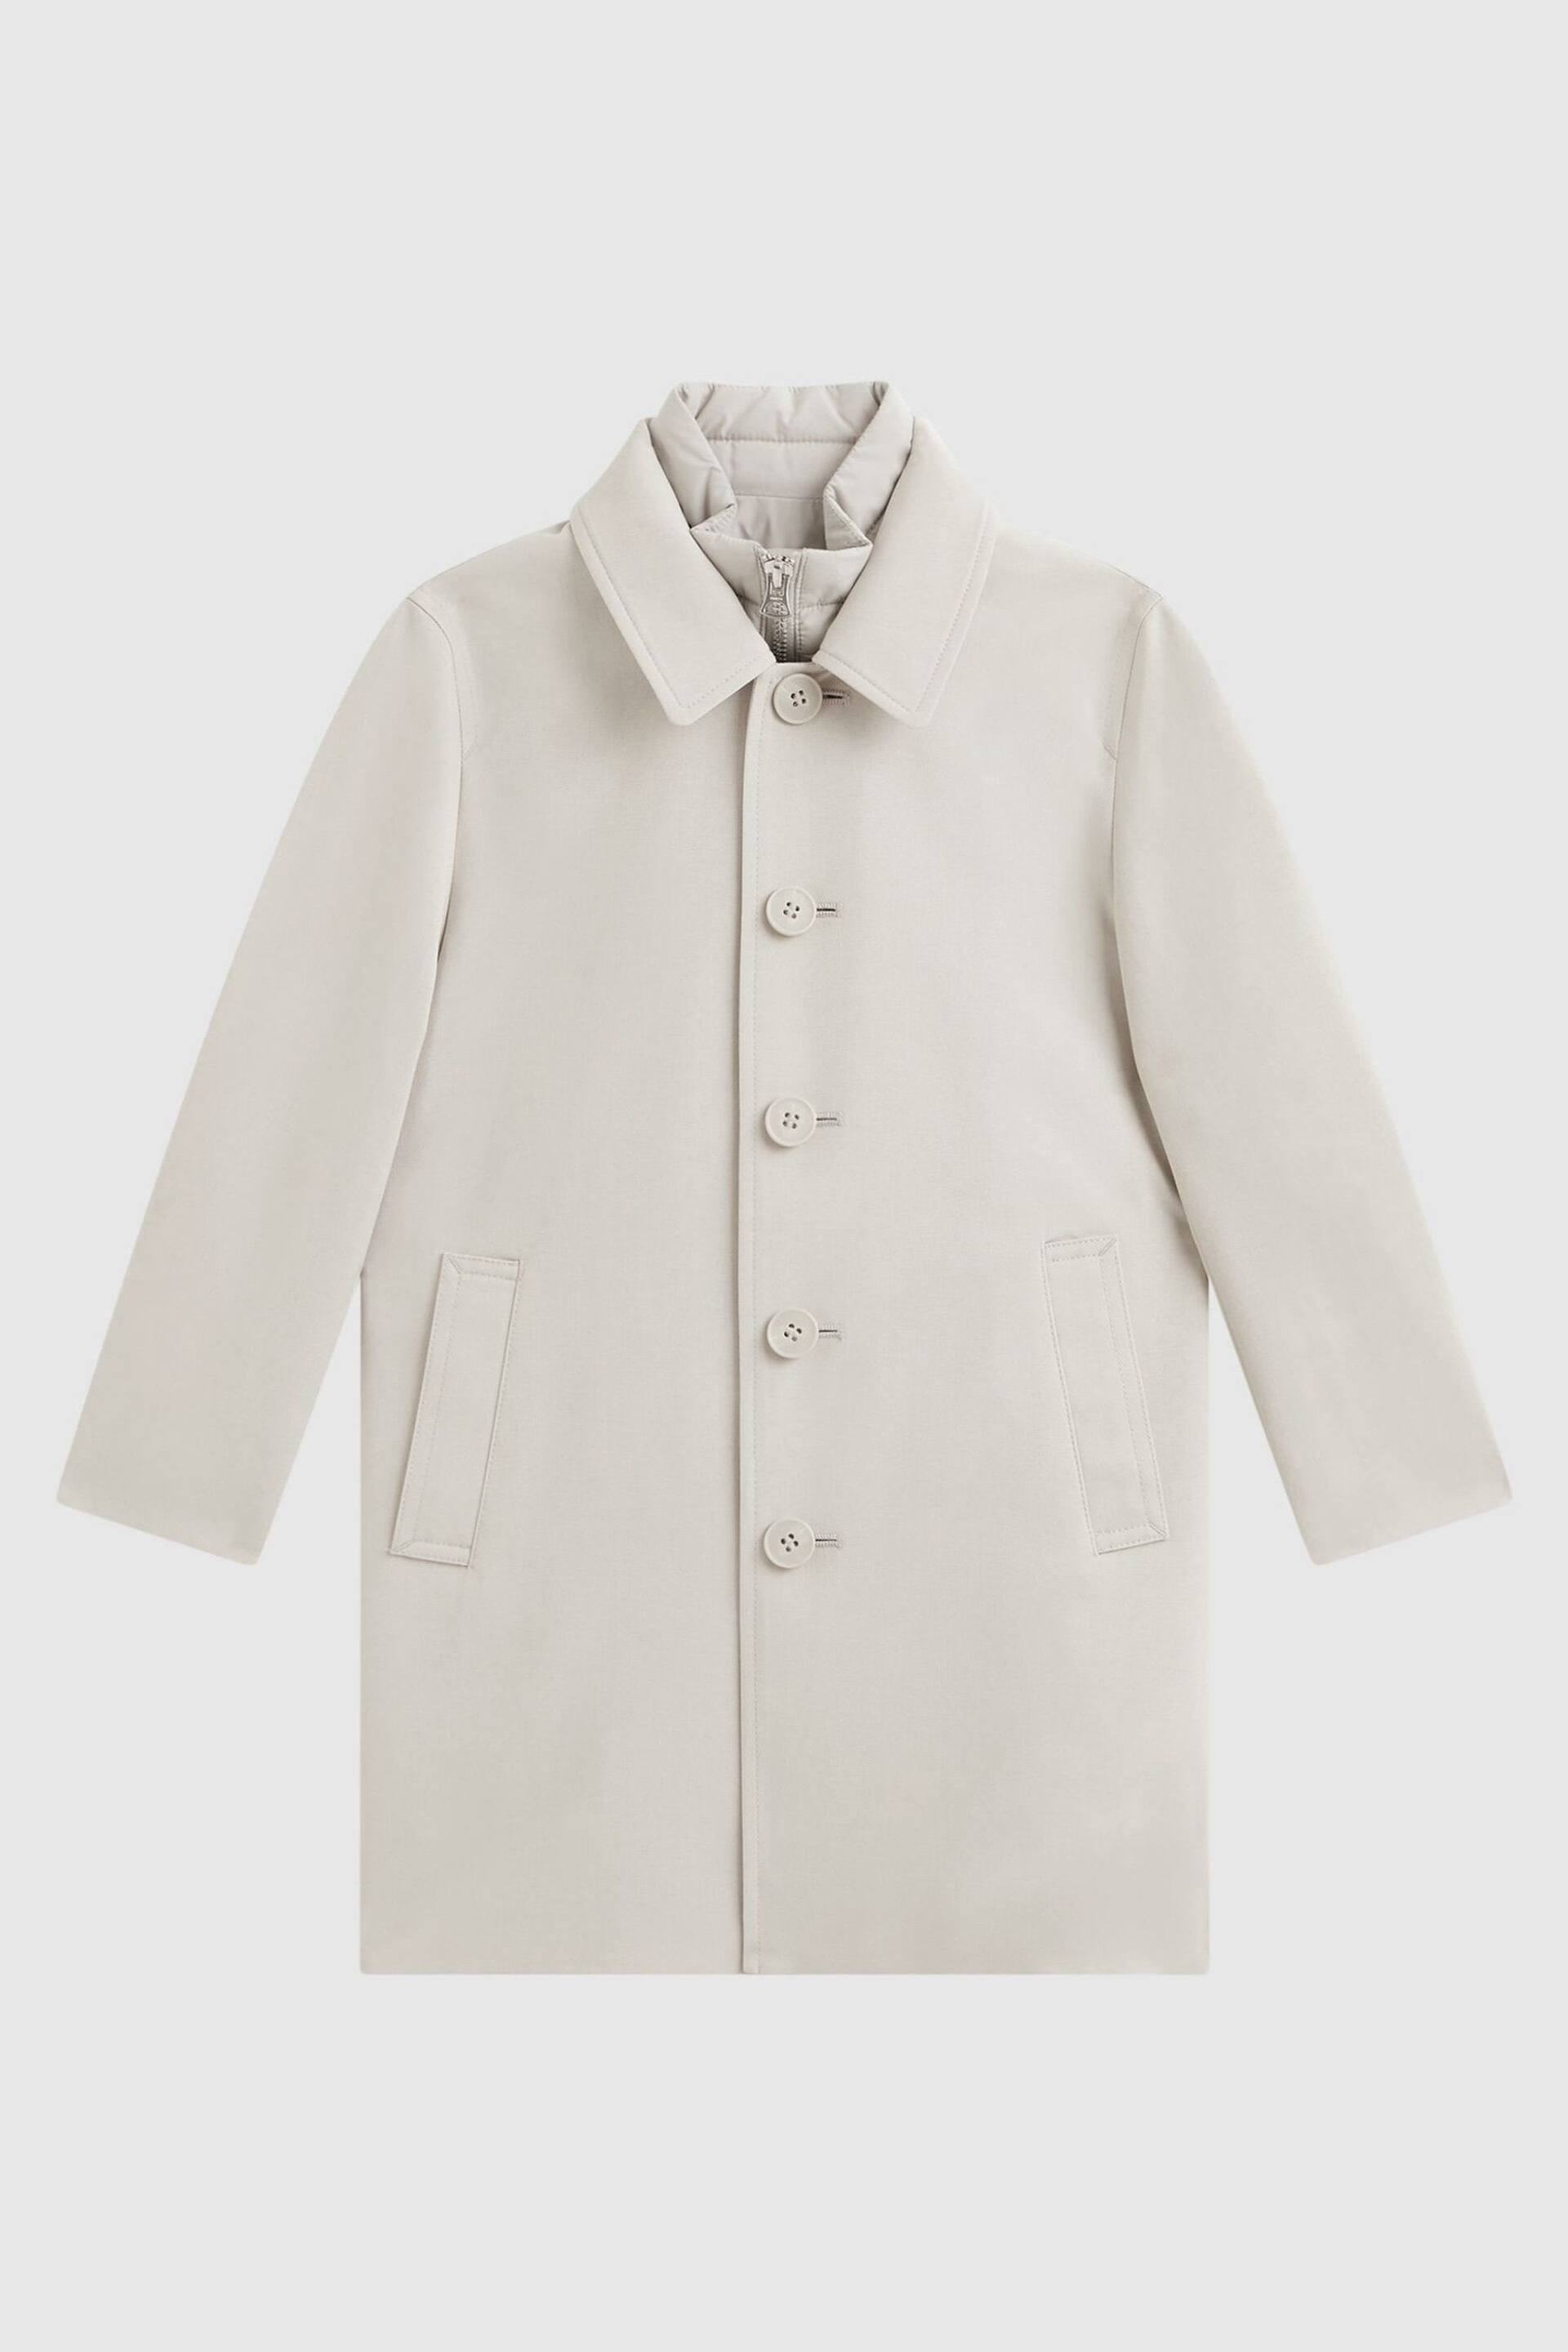 Reiss Stone Perrin Senior Trench With Funnel-Neck Insert - Image 2 of 7